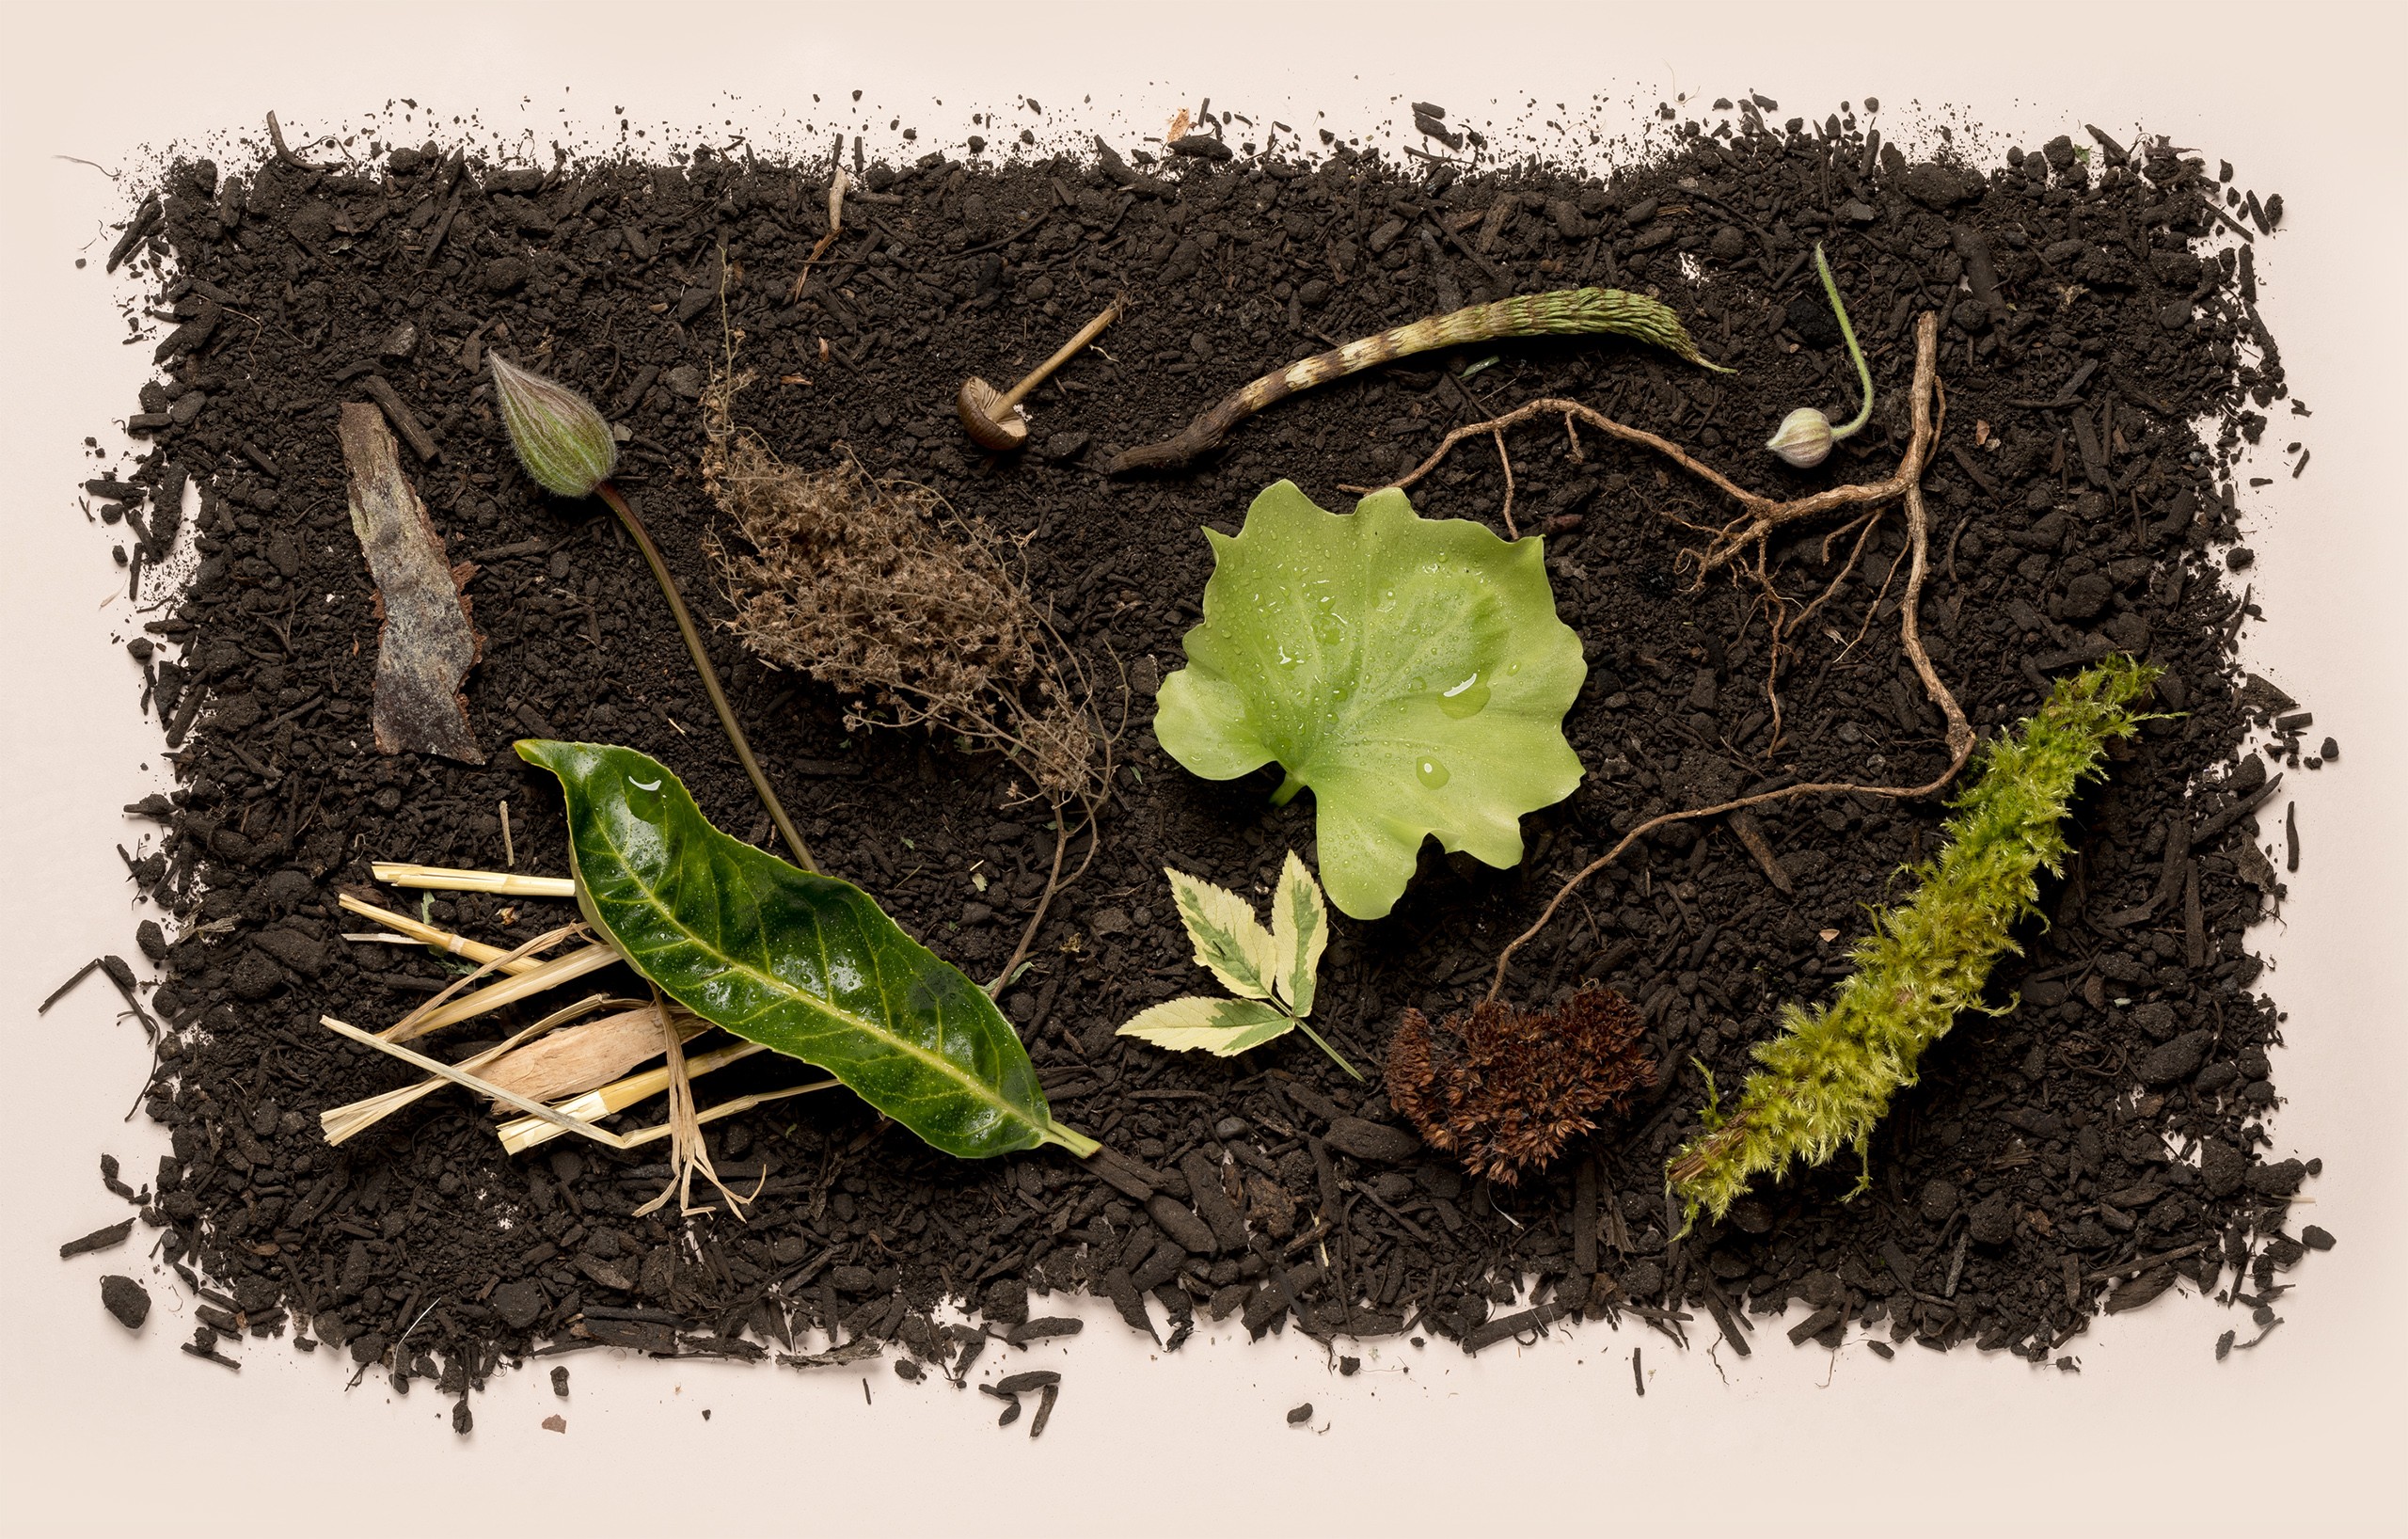 carefully arranged leaves, woodchips, mushrooms, and other plant life on a bed of dirt